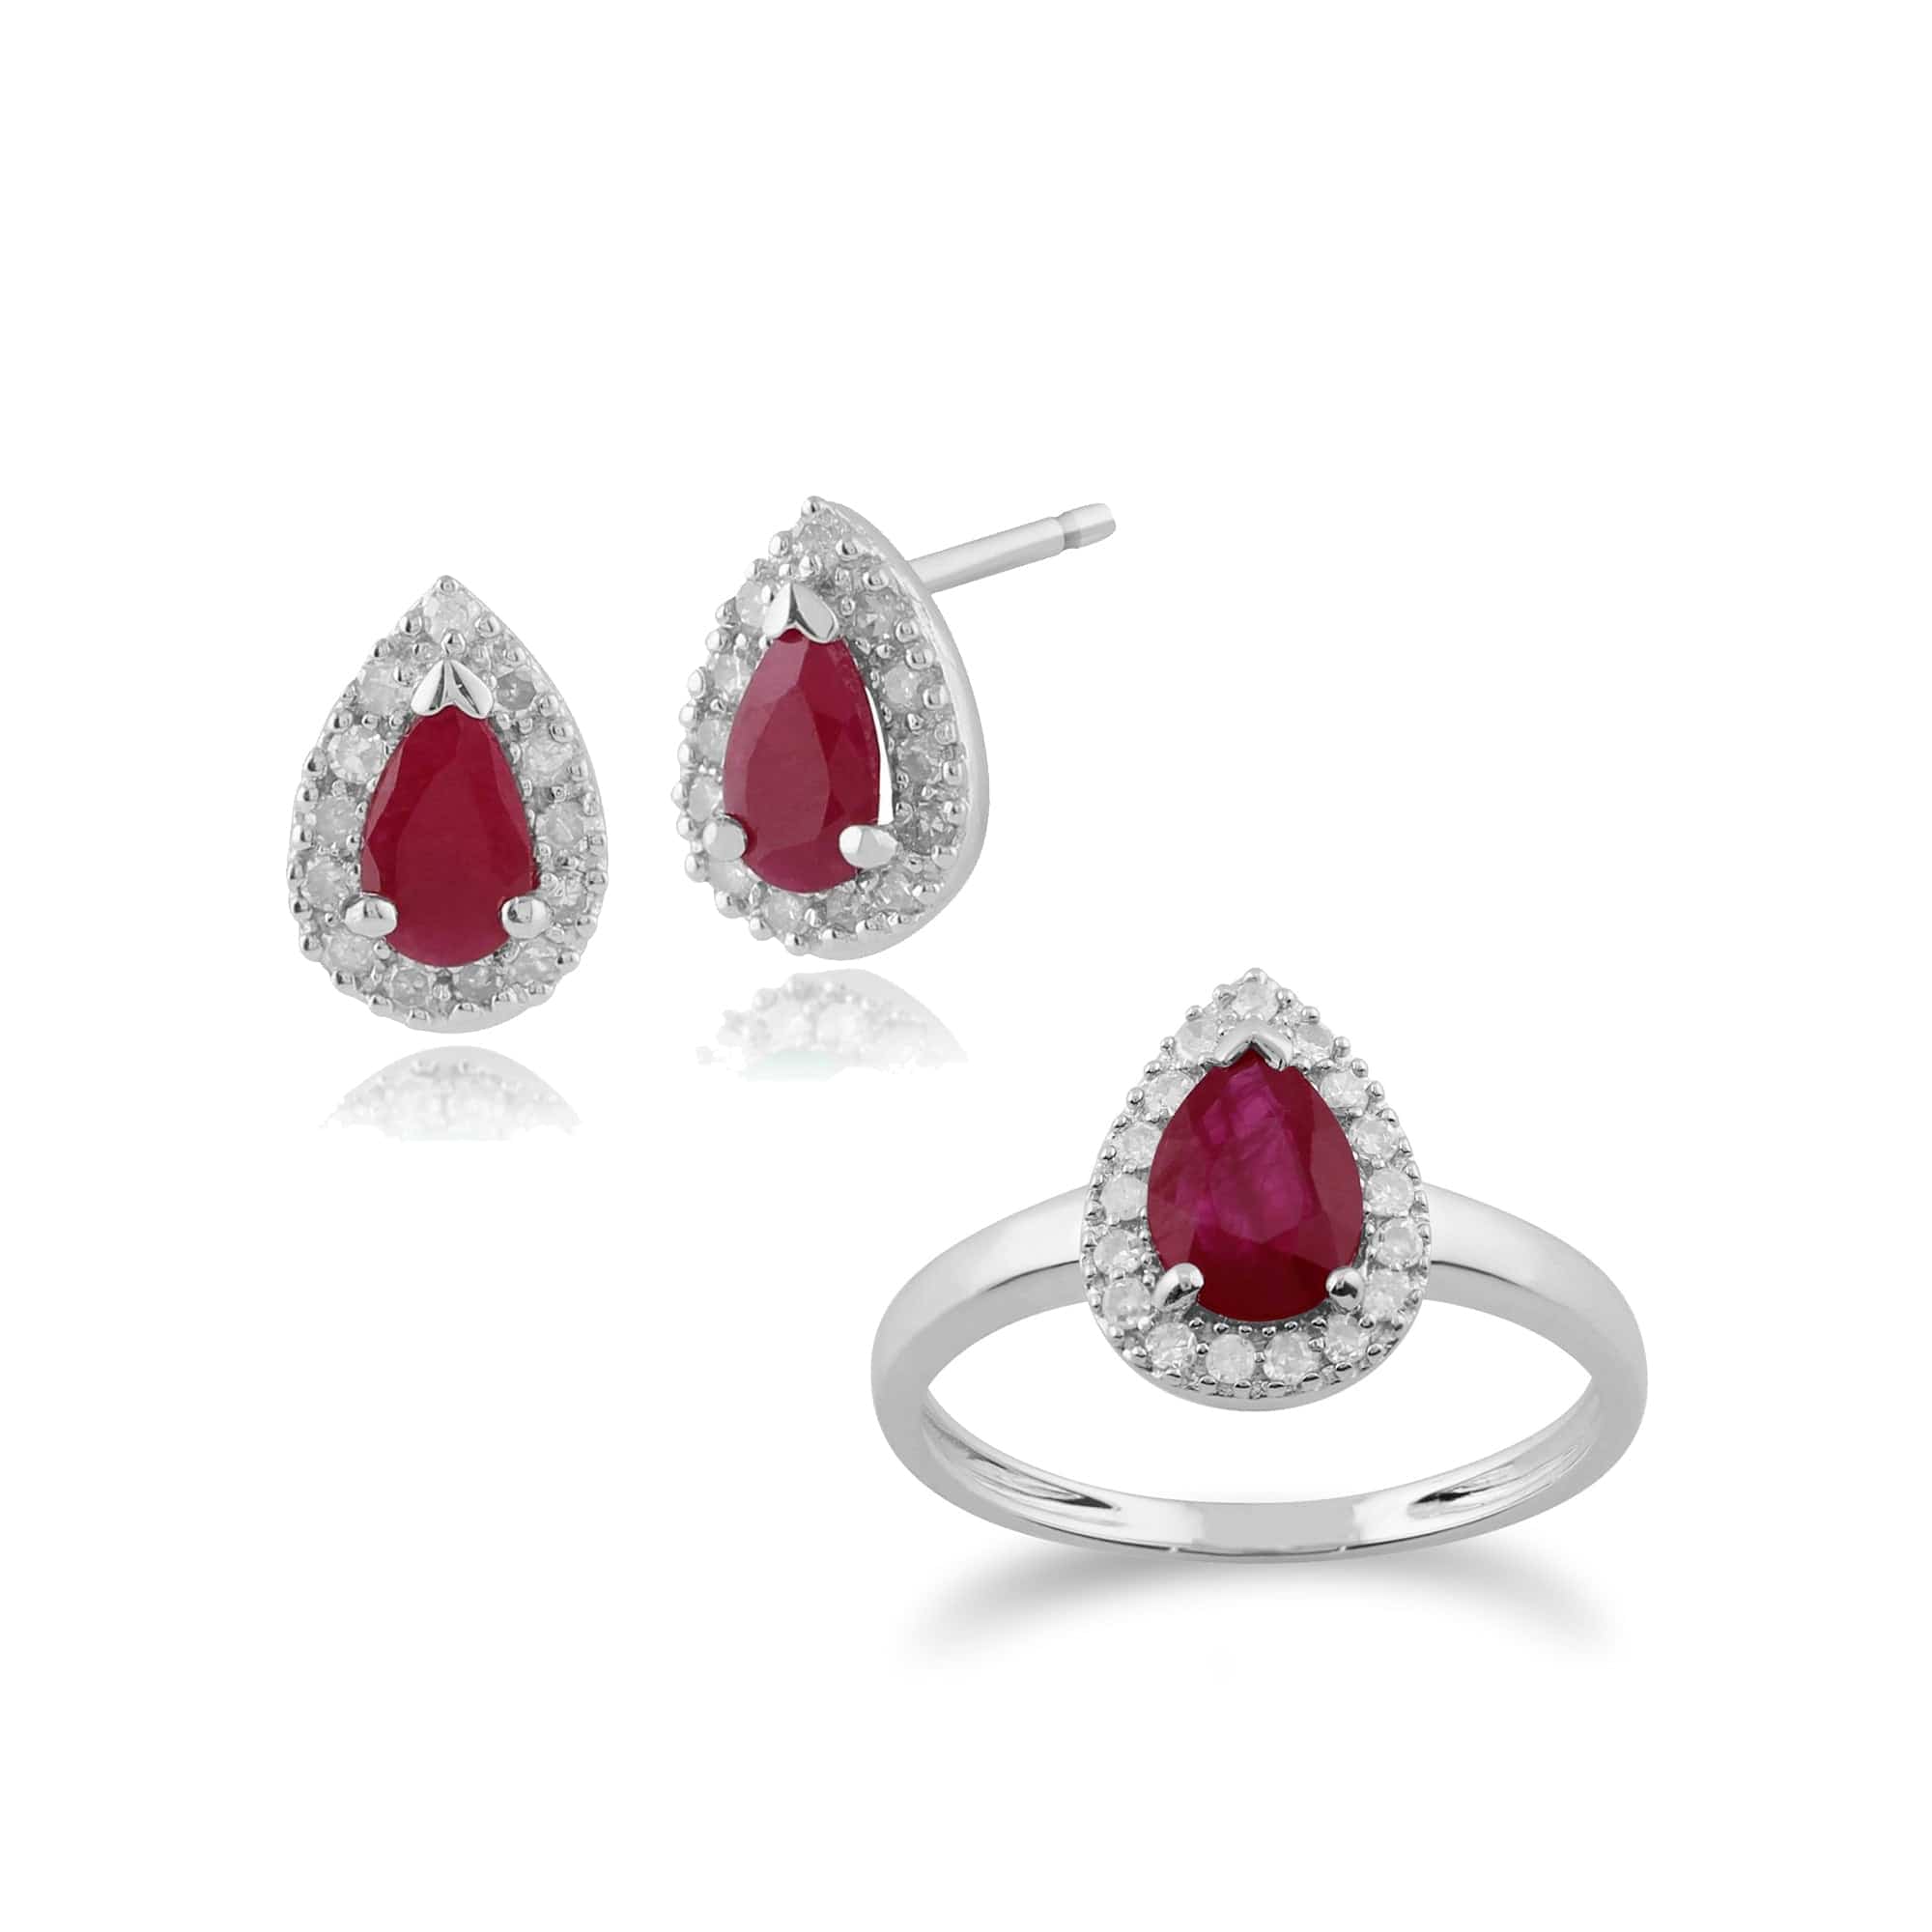 123E0693029-117R0164029 Classic Pear Ruby & Diamond Halo Stud Earrings & Ring Set in 9ct White Gold 1